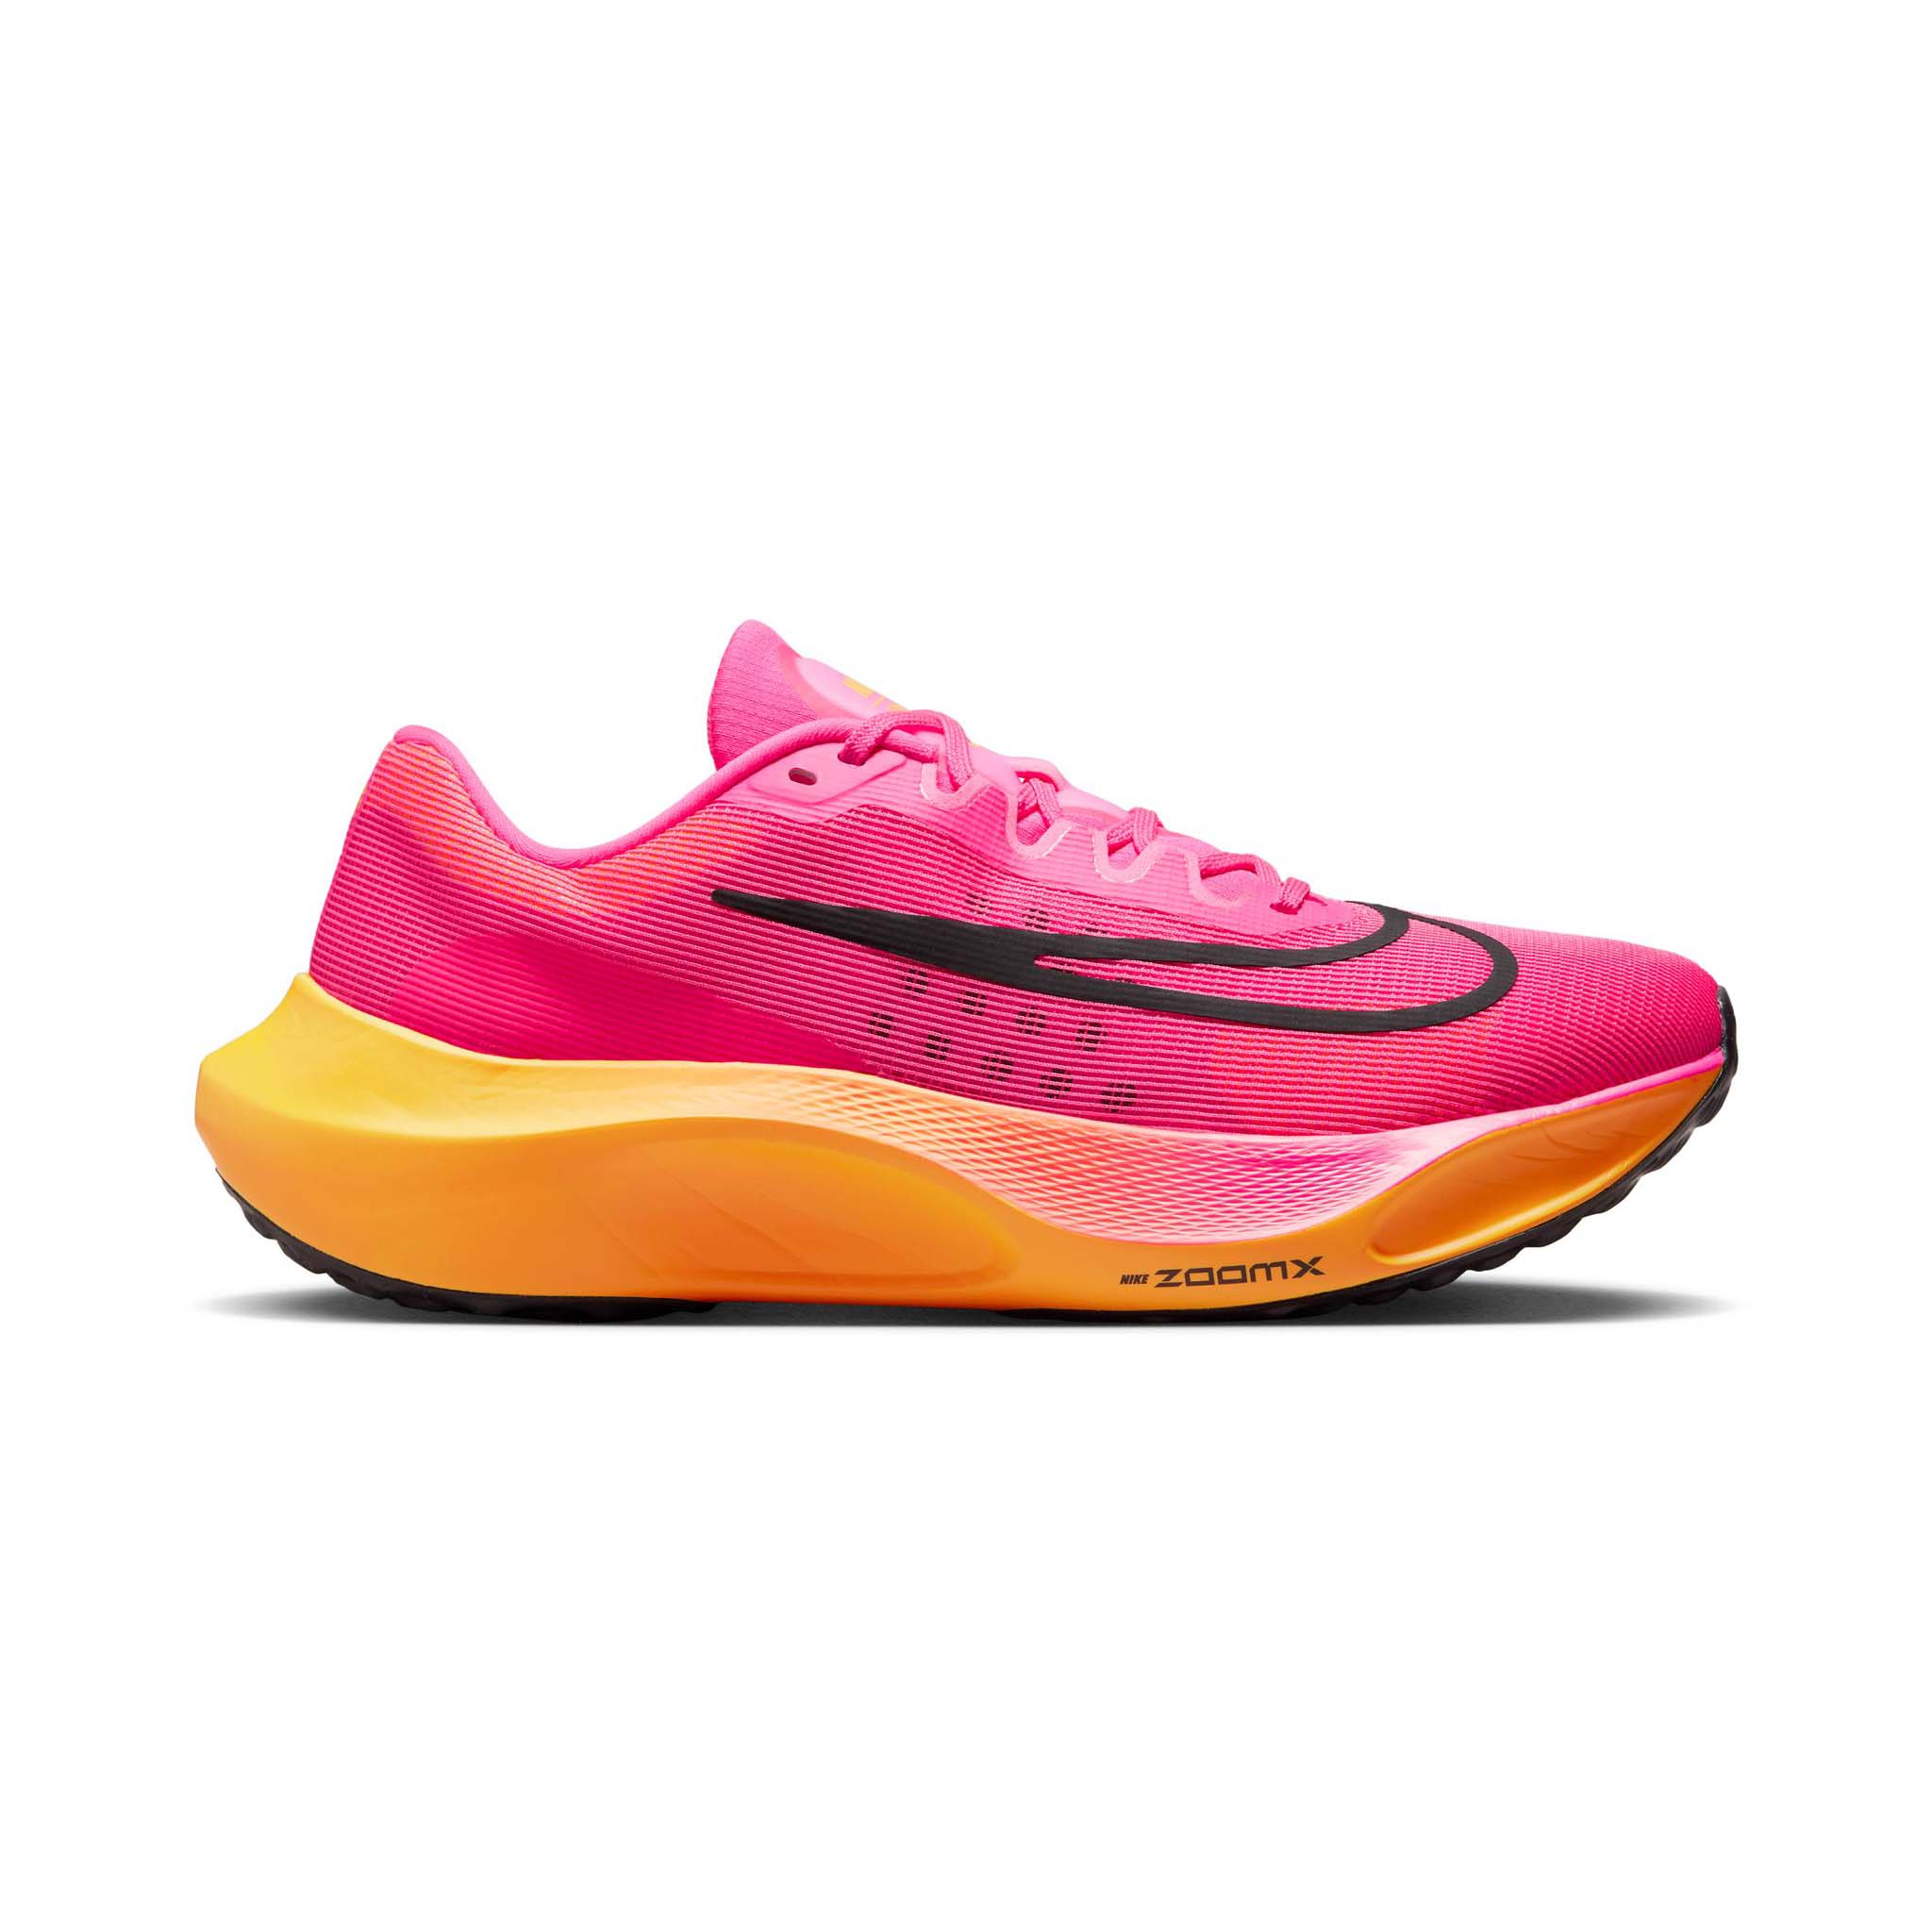 Nike Men's Zoom Fly 5 Running Shoes - Pink | Run4It